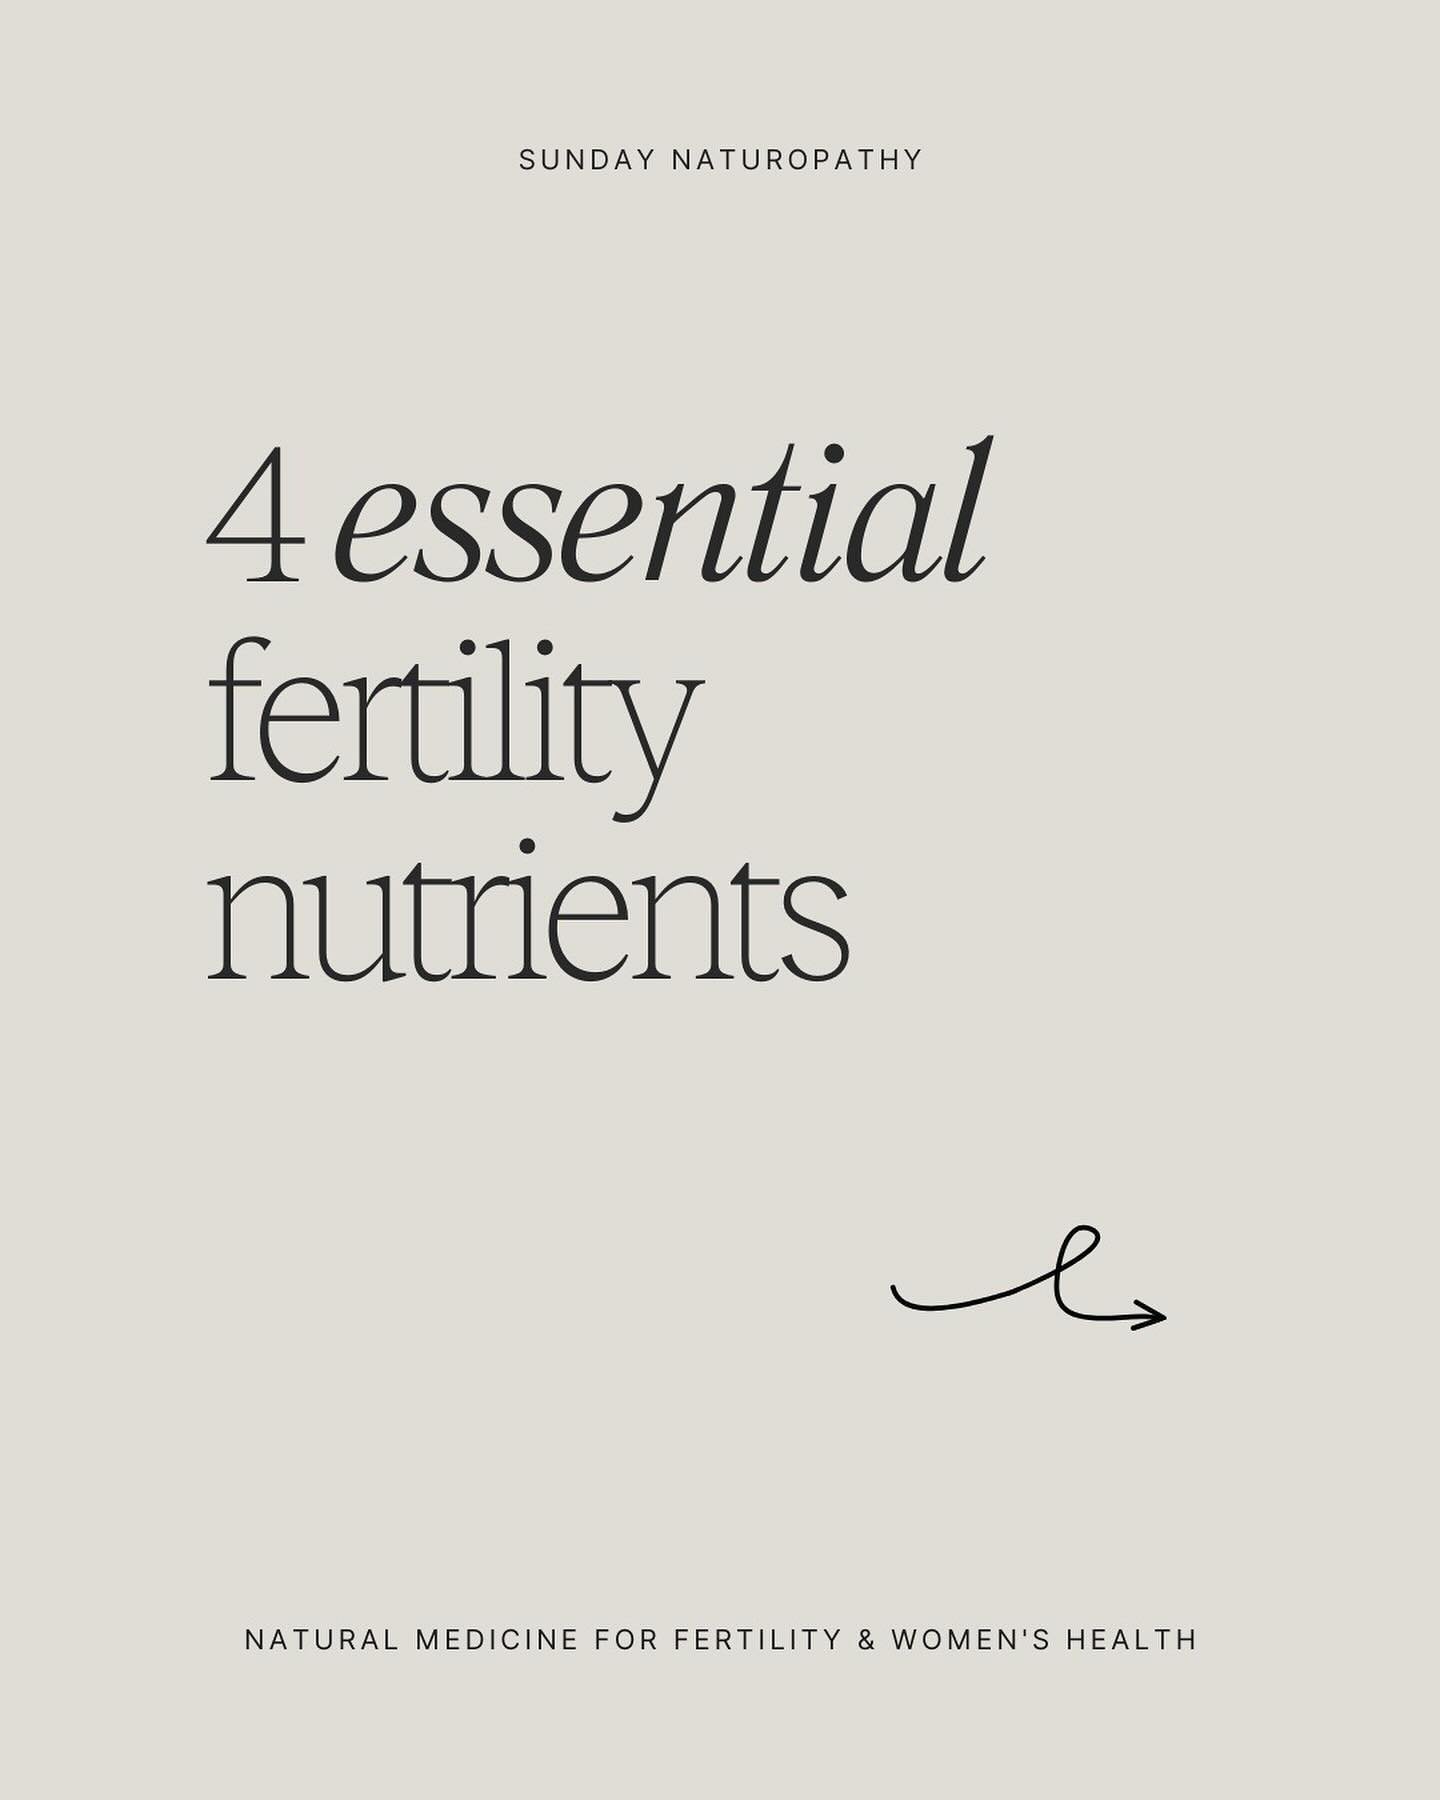 It&rsquo;s the fundamentals, like nutrition and sleep, that must form the basis of any fertility/preconception journey. 

I&rsquo;m a big fan of appropriate supplementation, but we can&rsquo;t expect supplements to do all of the heavy lifting. When i